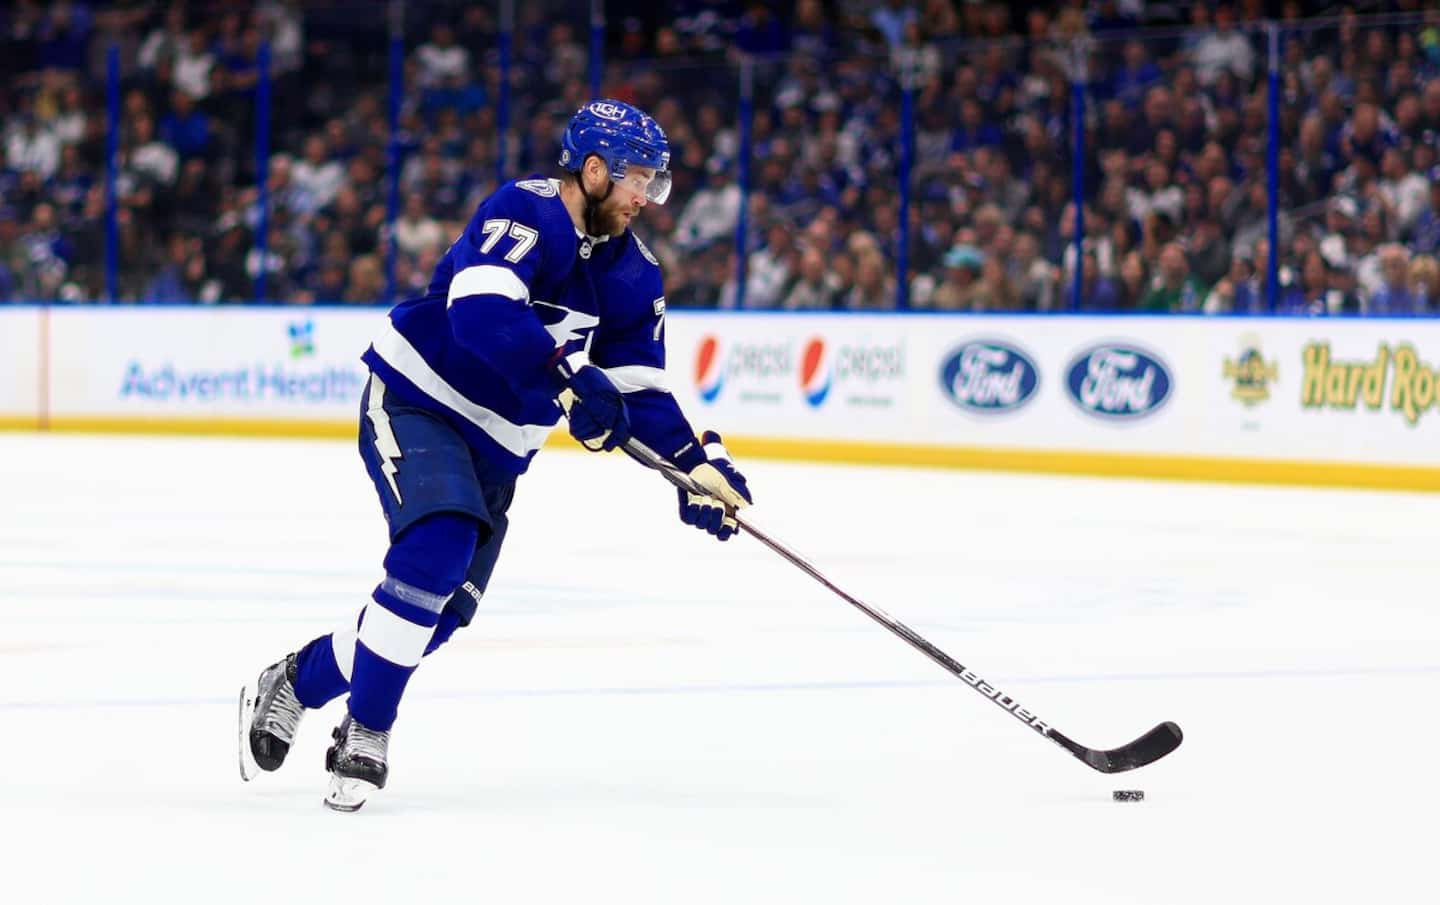 "We will bounce back" - Victor Hedman